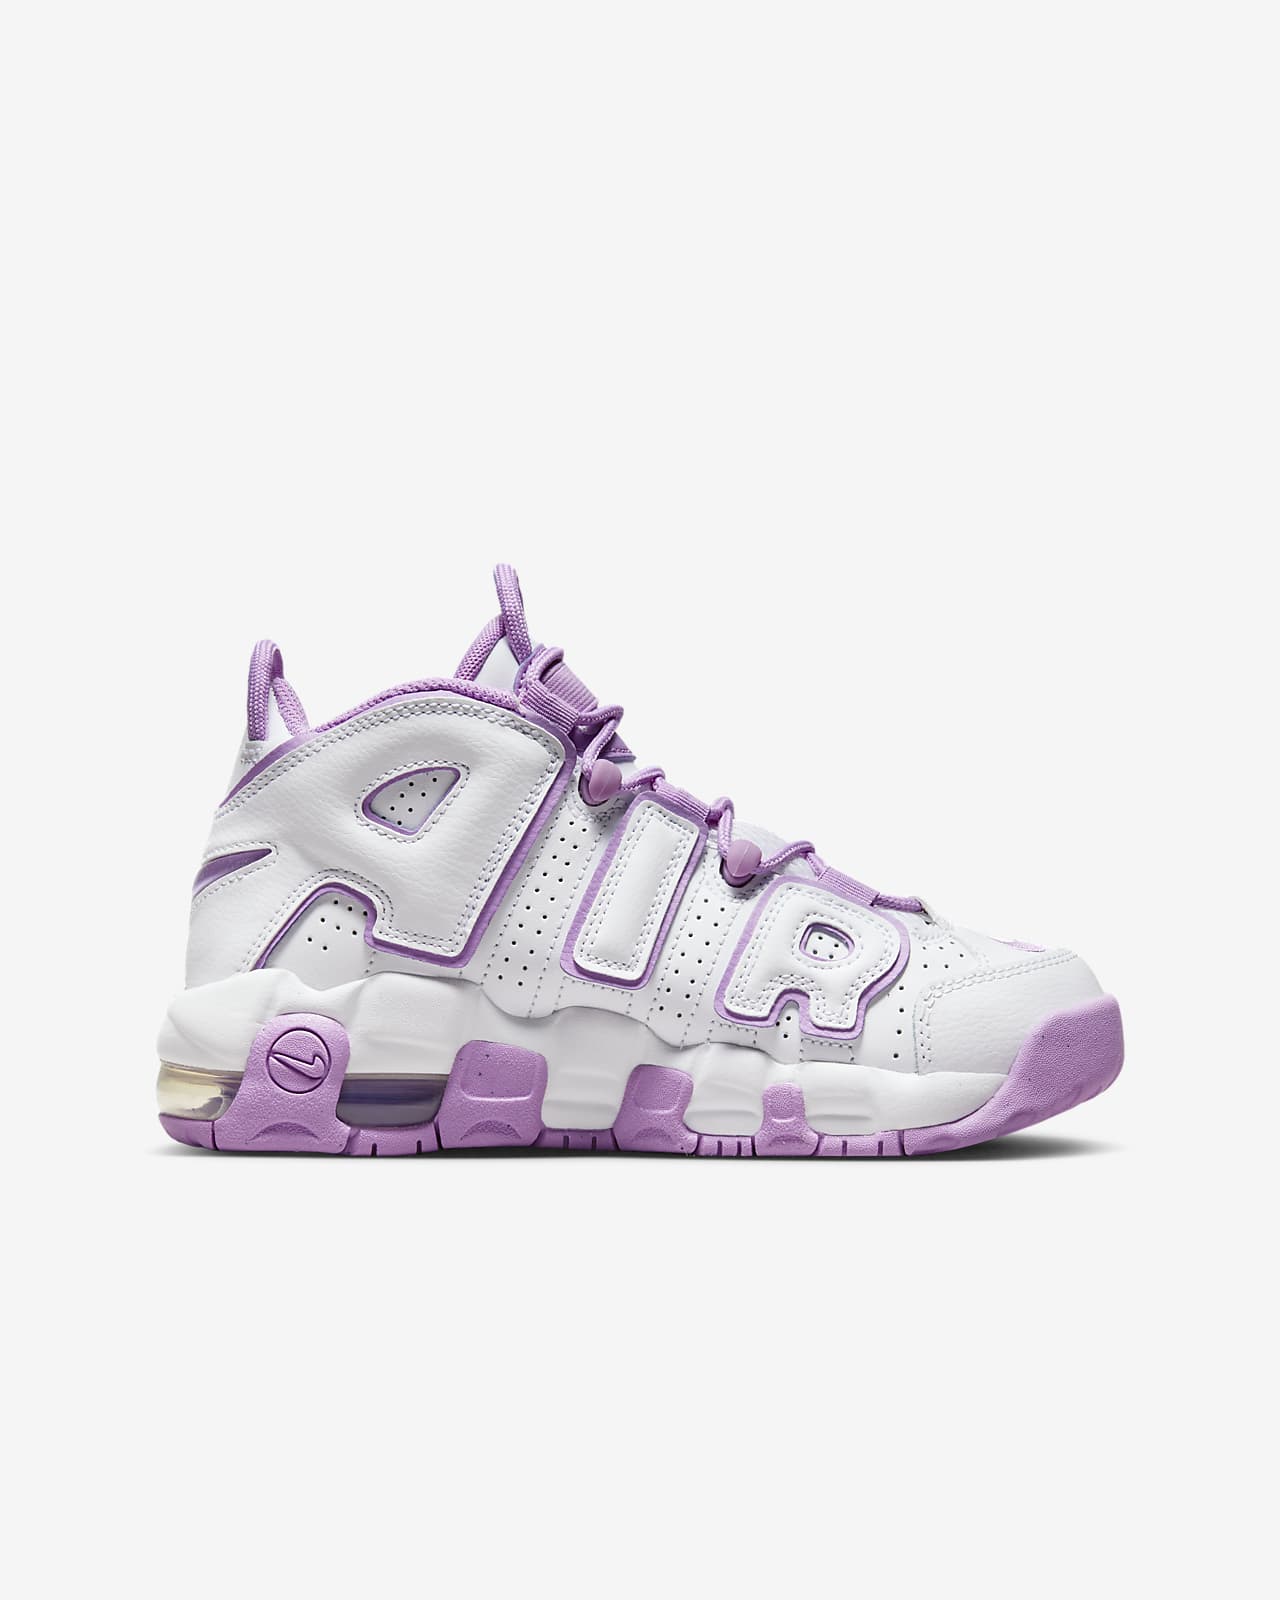 Unavoidable scene wastefully Nike Air More Uptempo Big Kids' Shoes. Nike.com